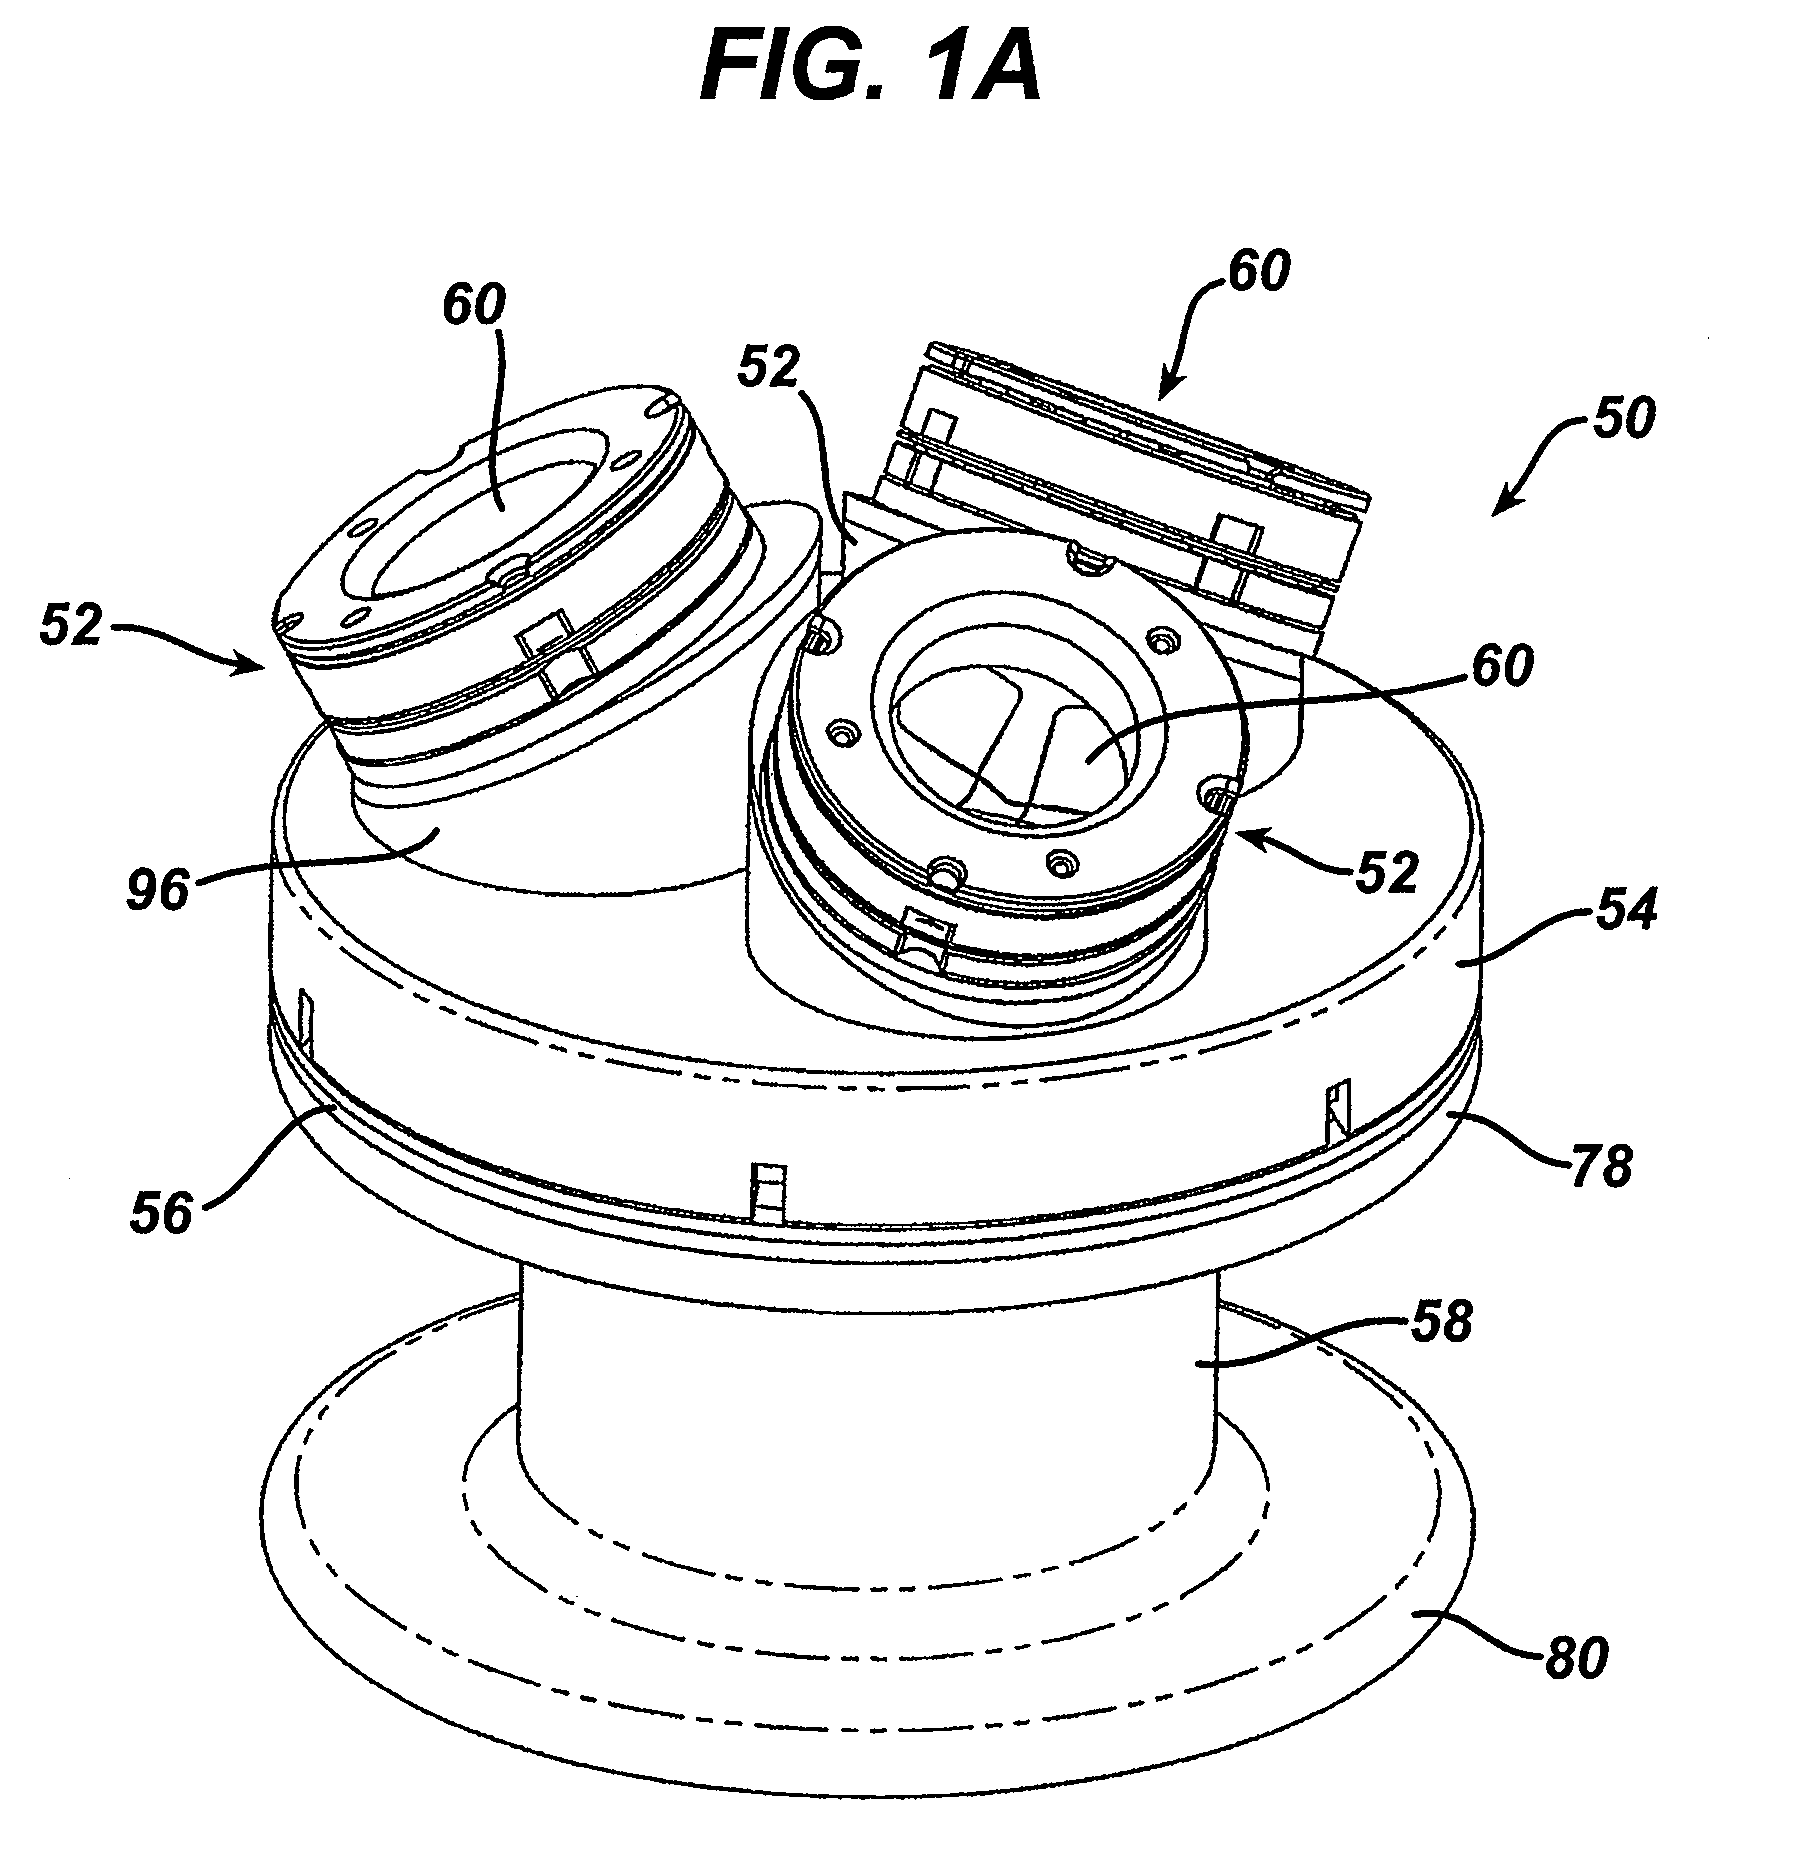 Variable Surgical Access Device